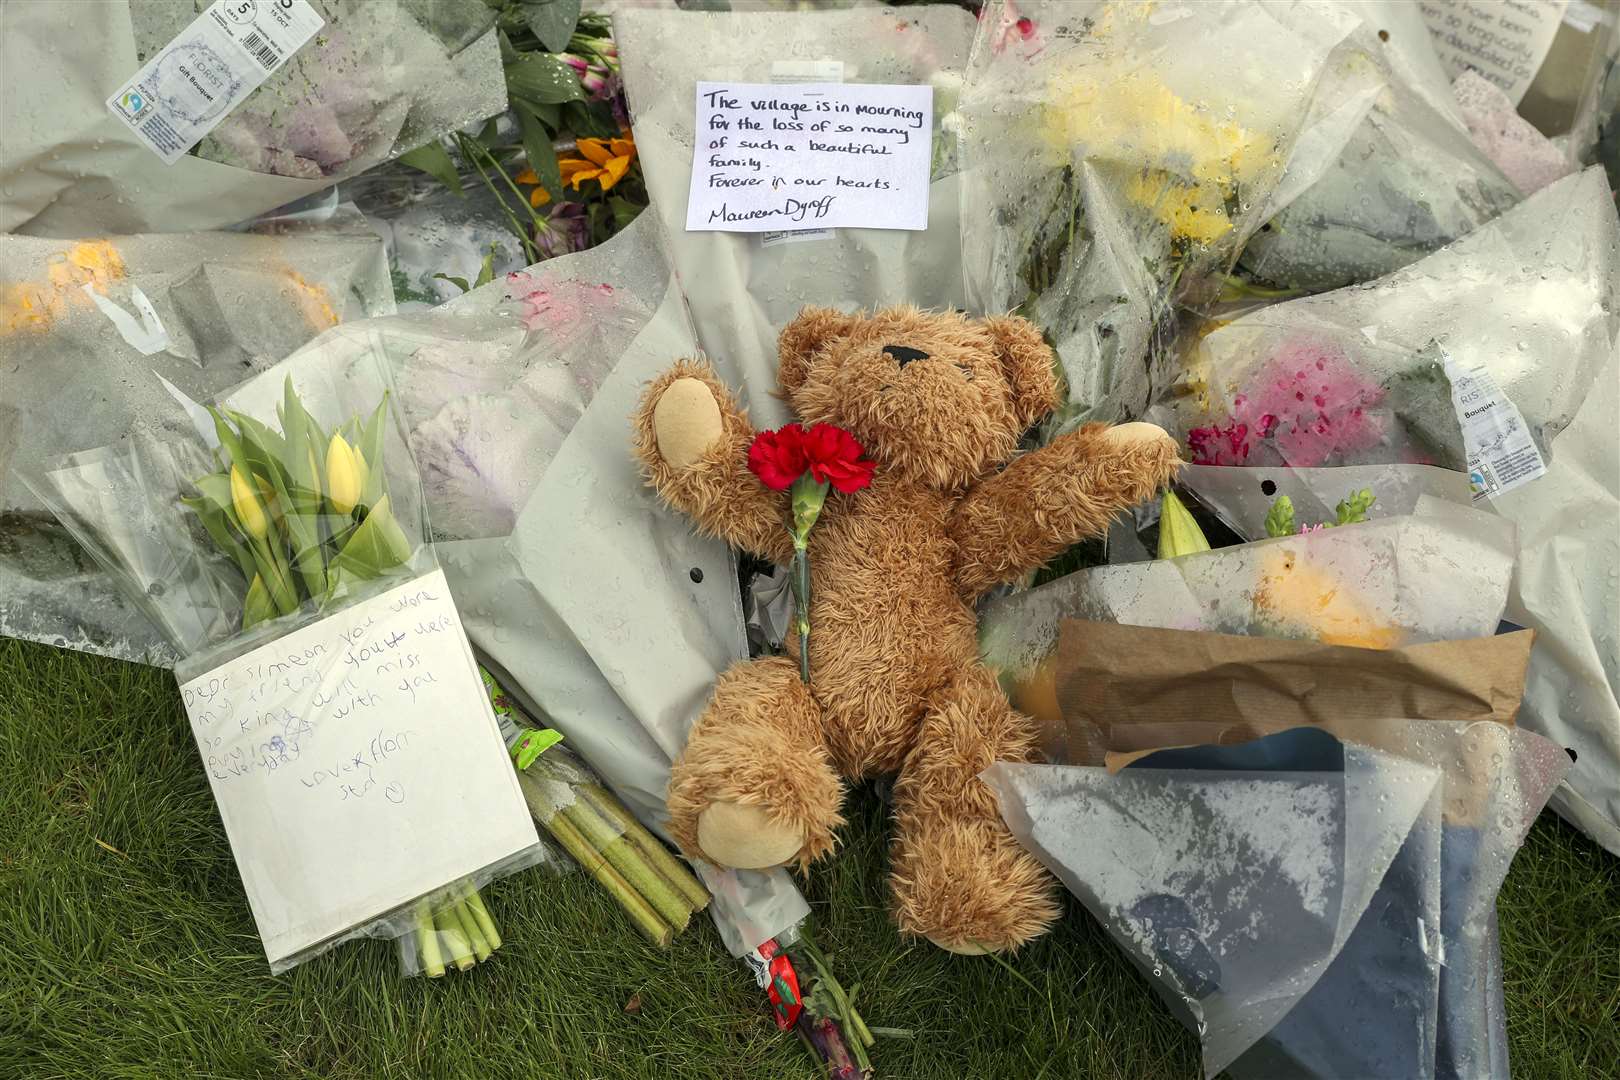 Flowers and teddy bear left outside the church (Steve Parsons/PA)